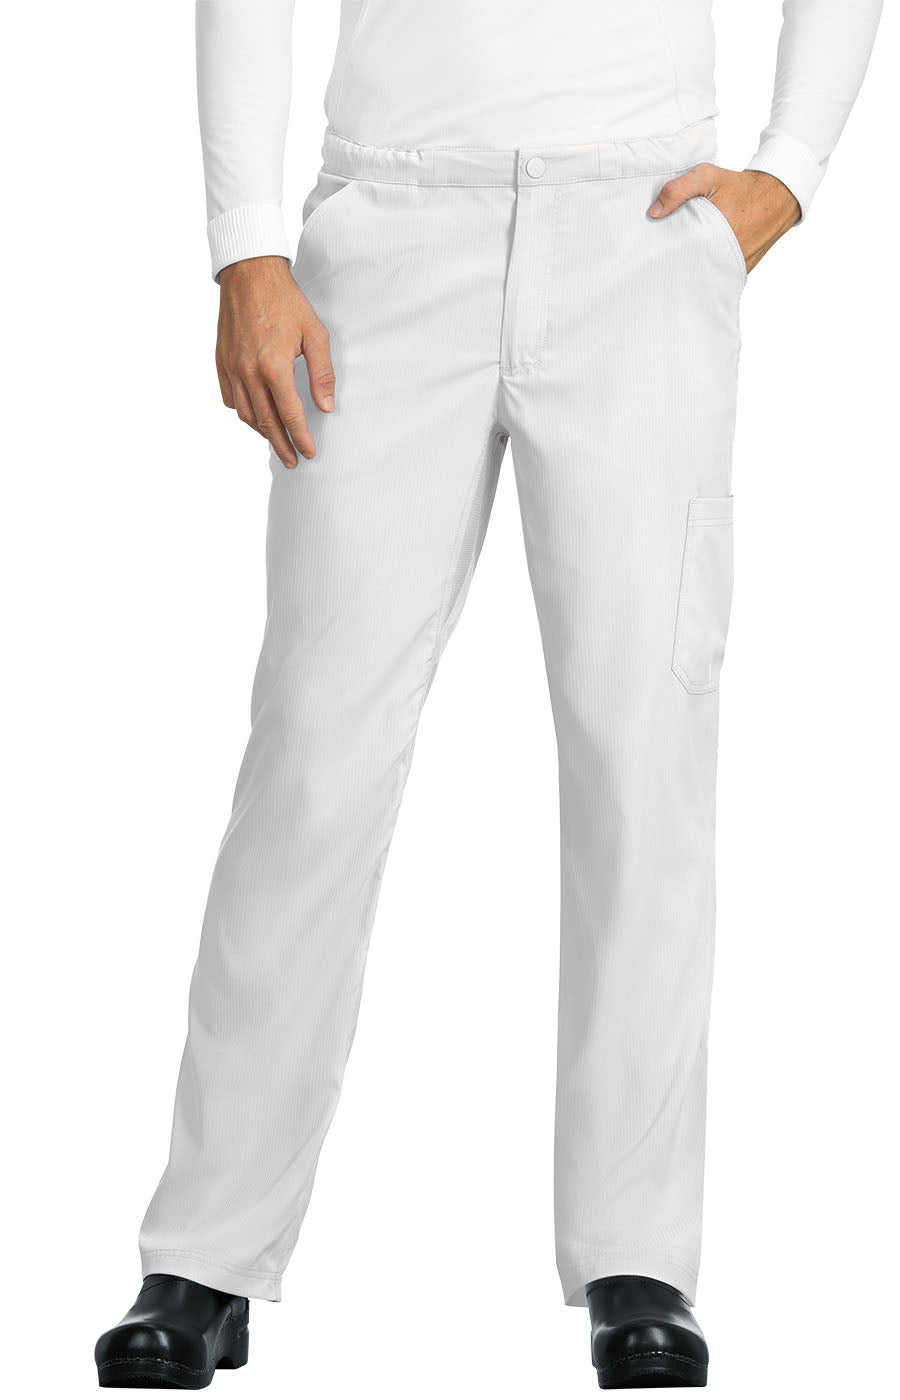 Discovery Pant White